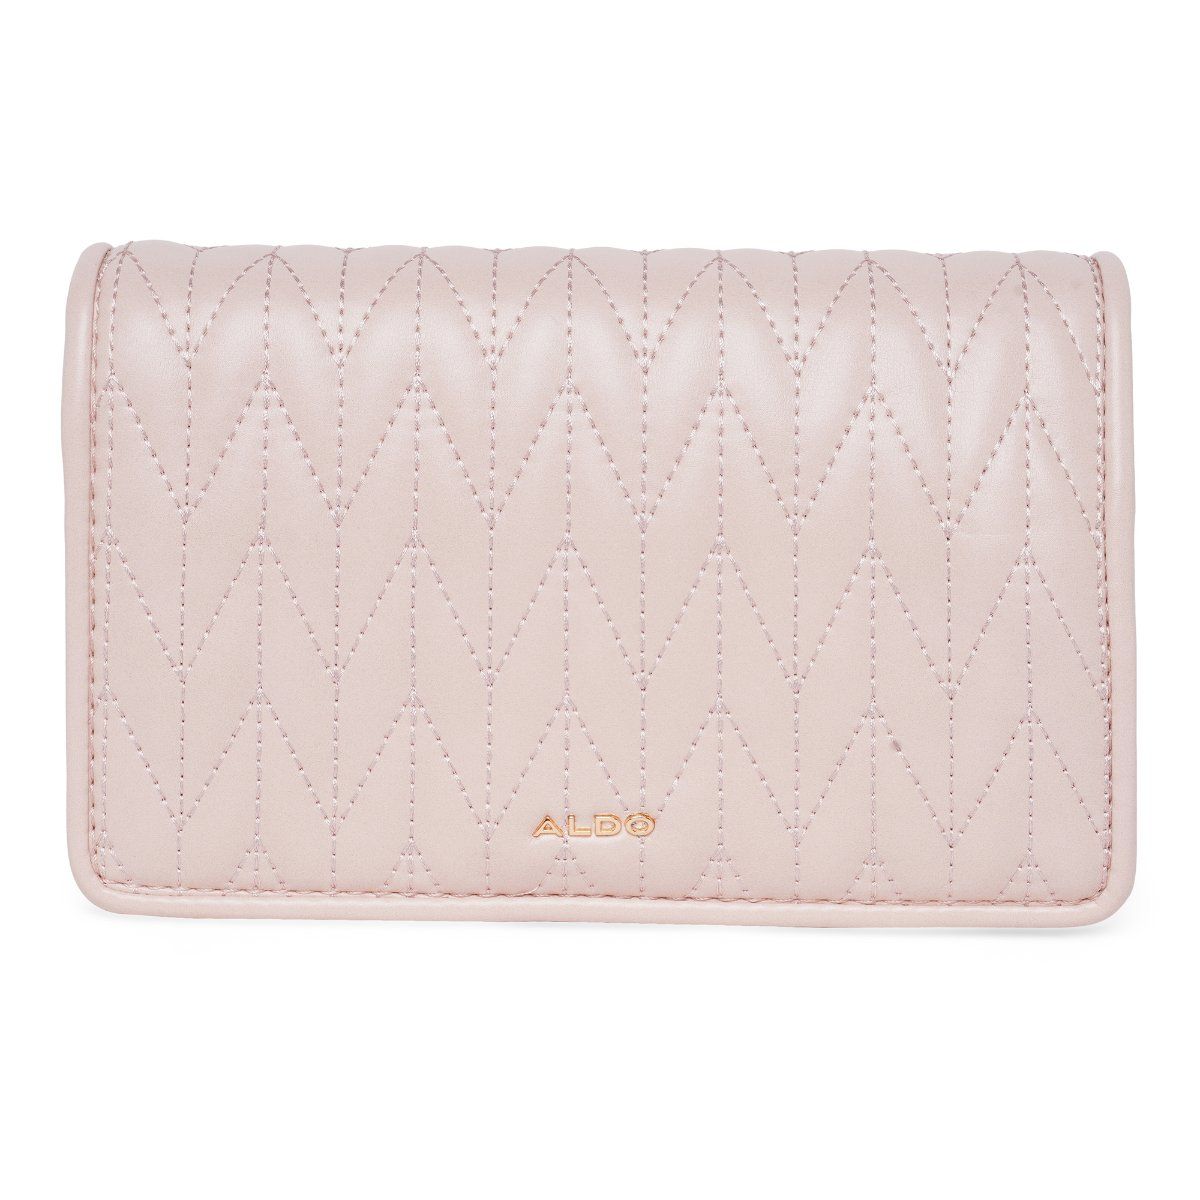 Aldo Textured Pink Wallet (Pink) At Nykaa, Best Beauty Products Online